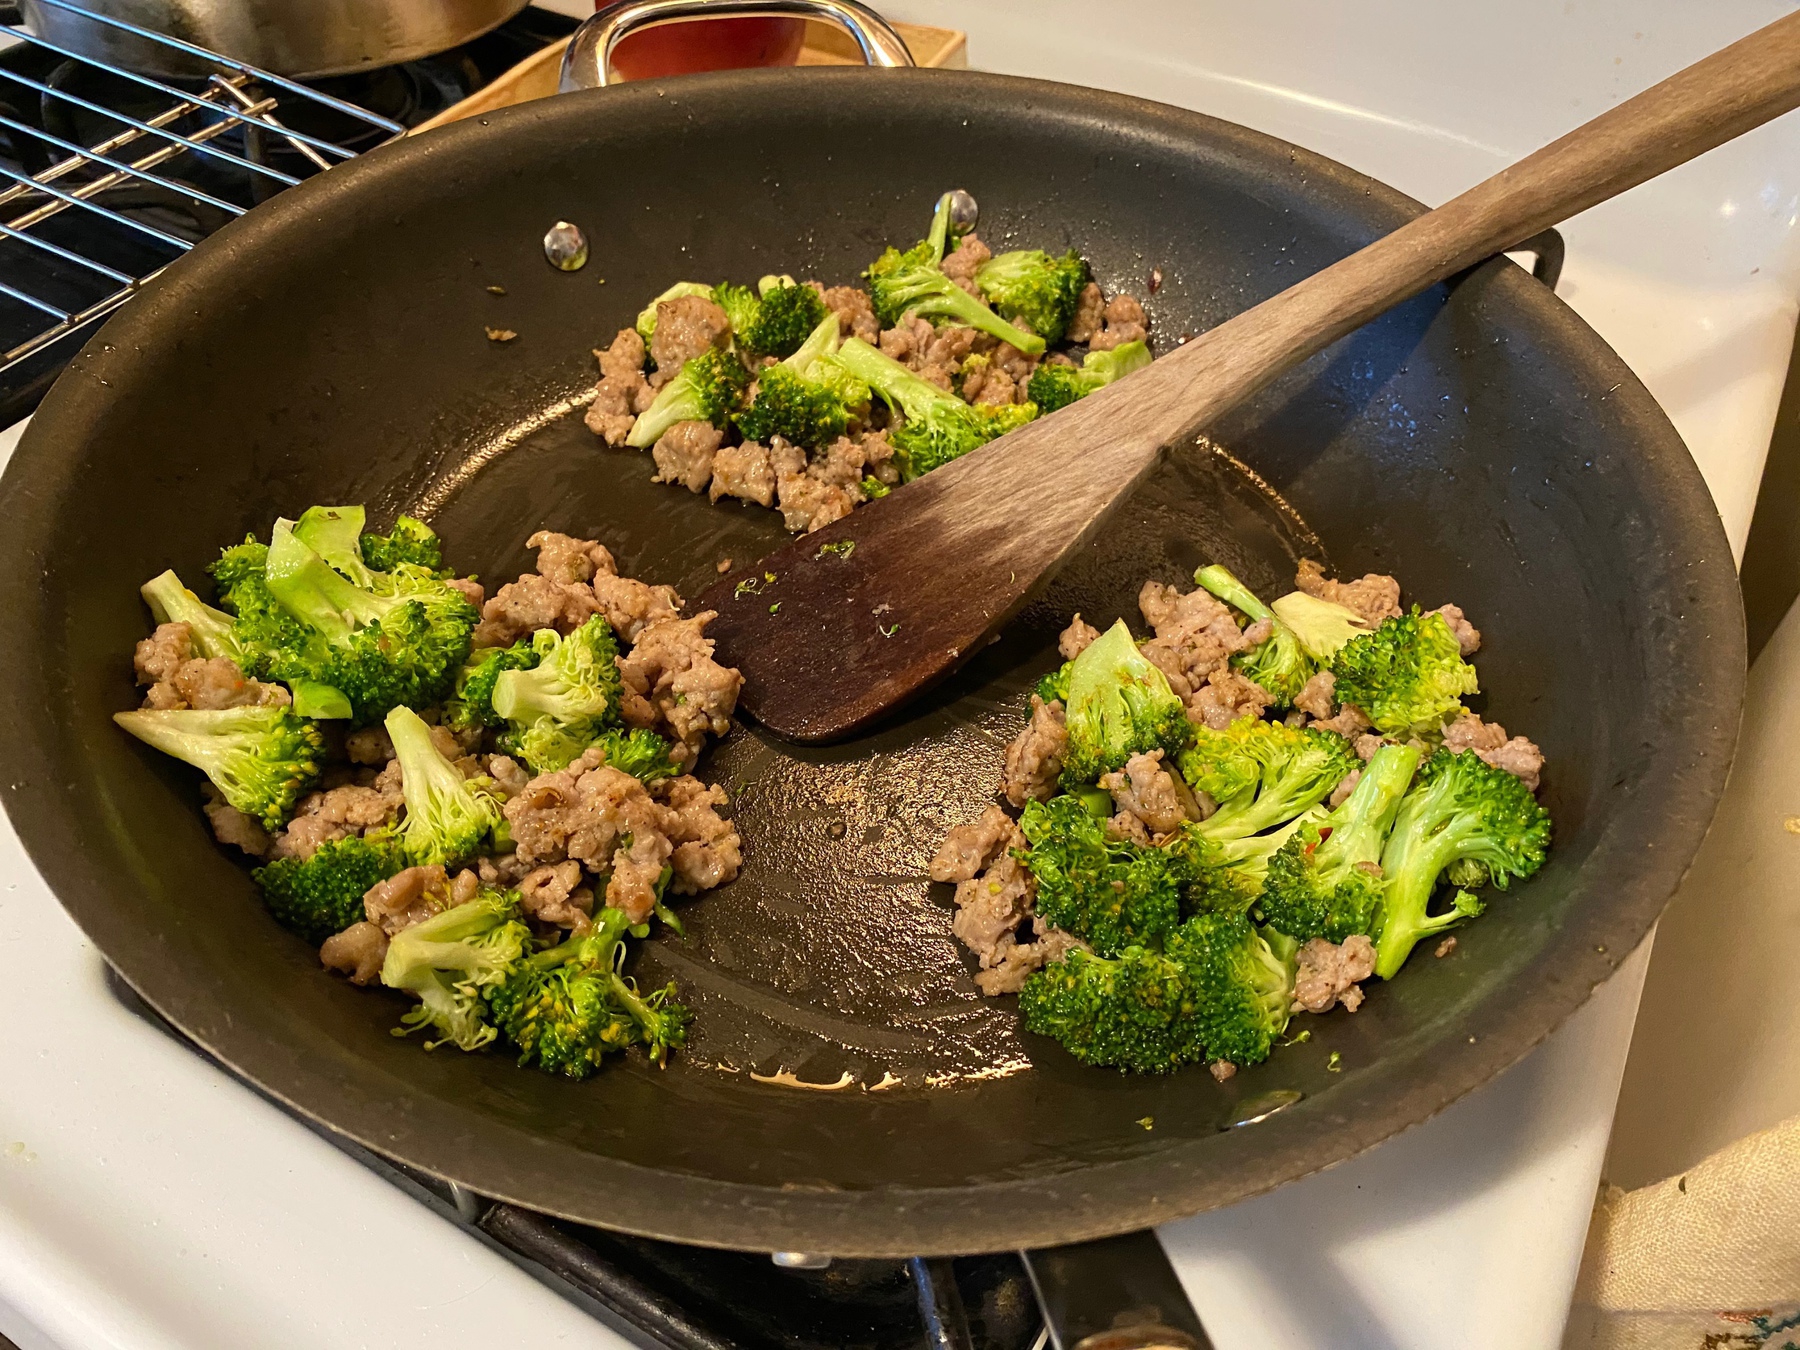 Close up of broccoli and sausage in a skillet on top of a stove.